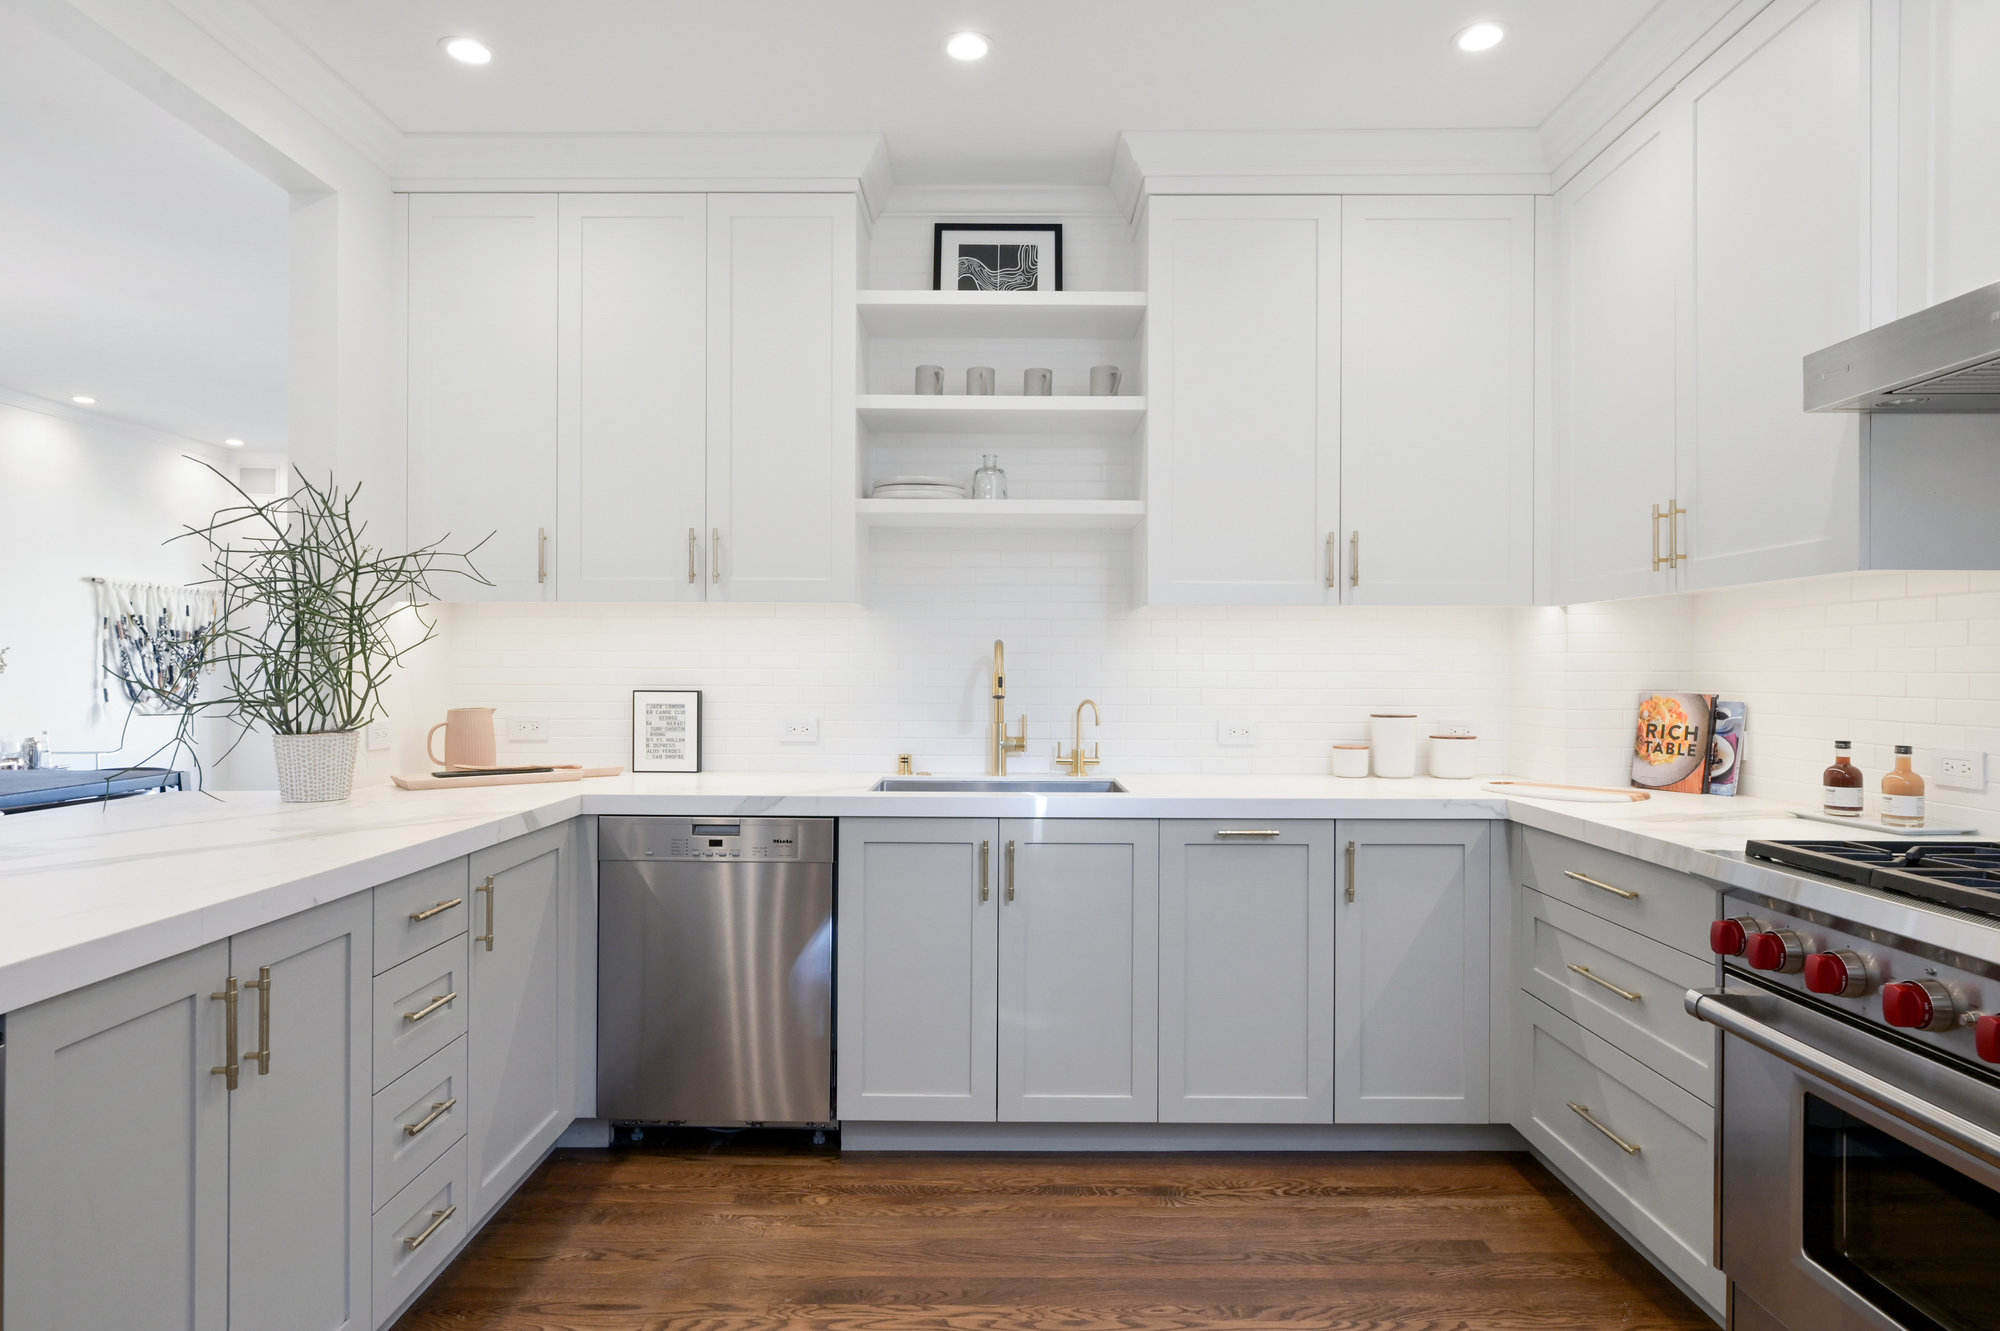 Property Photo: A view of the U shaped grey cabinets in the kitchen